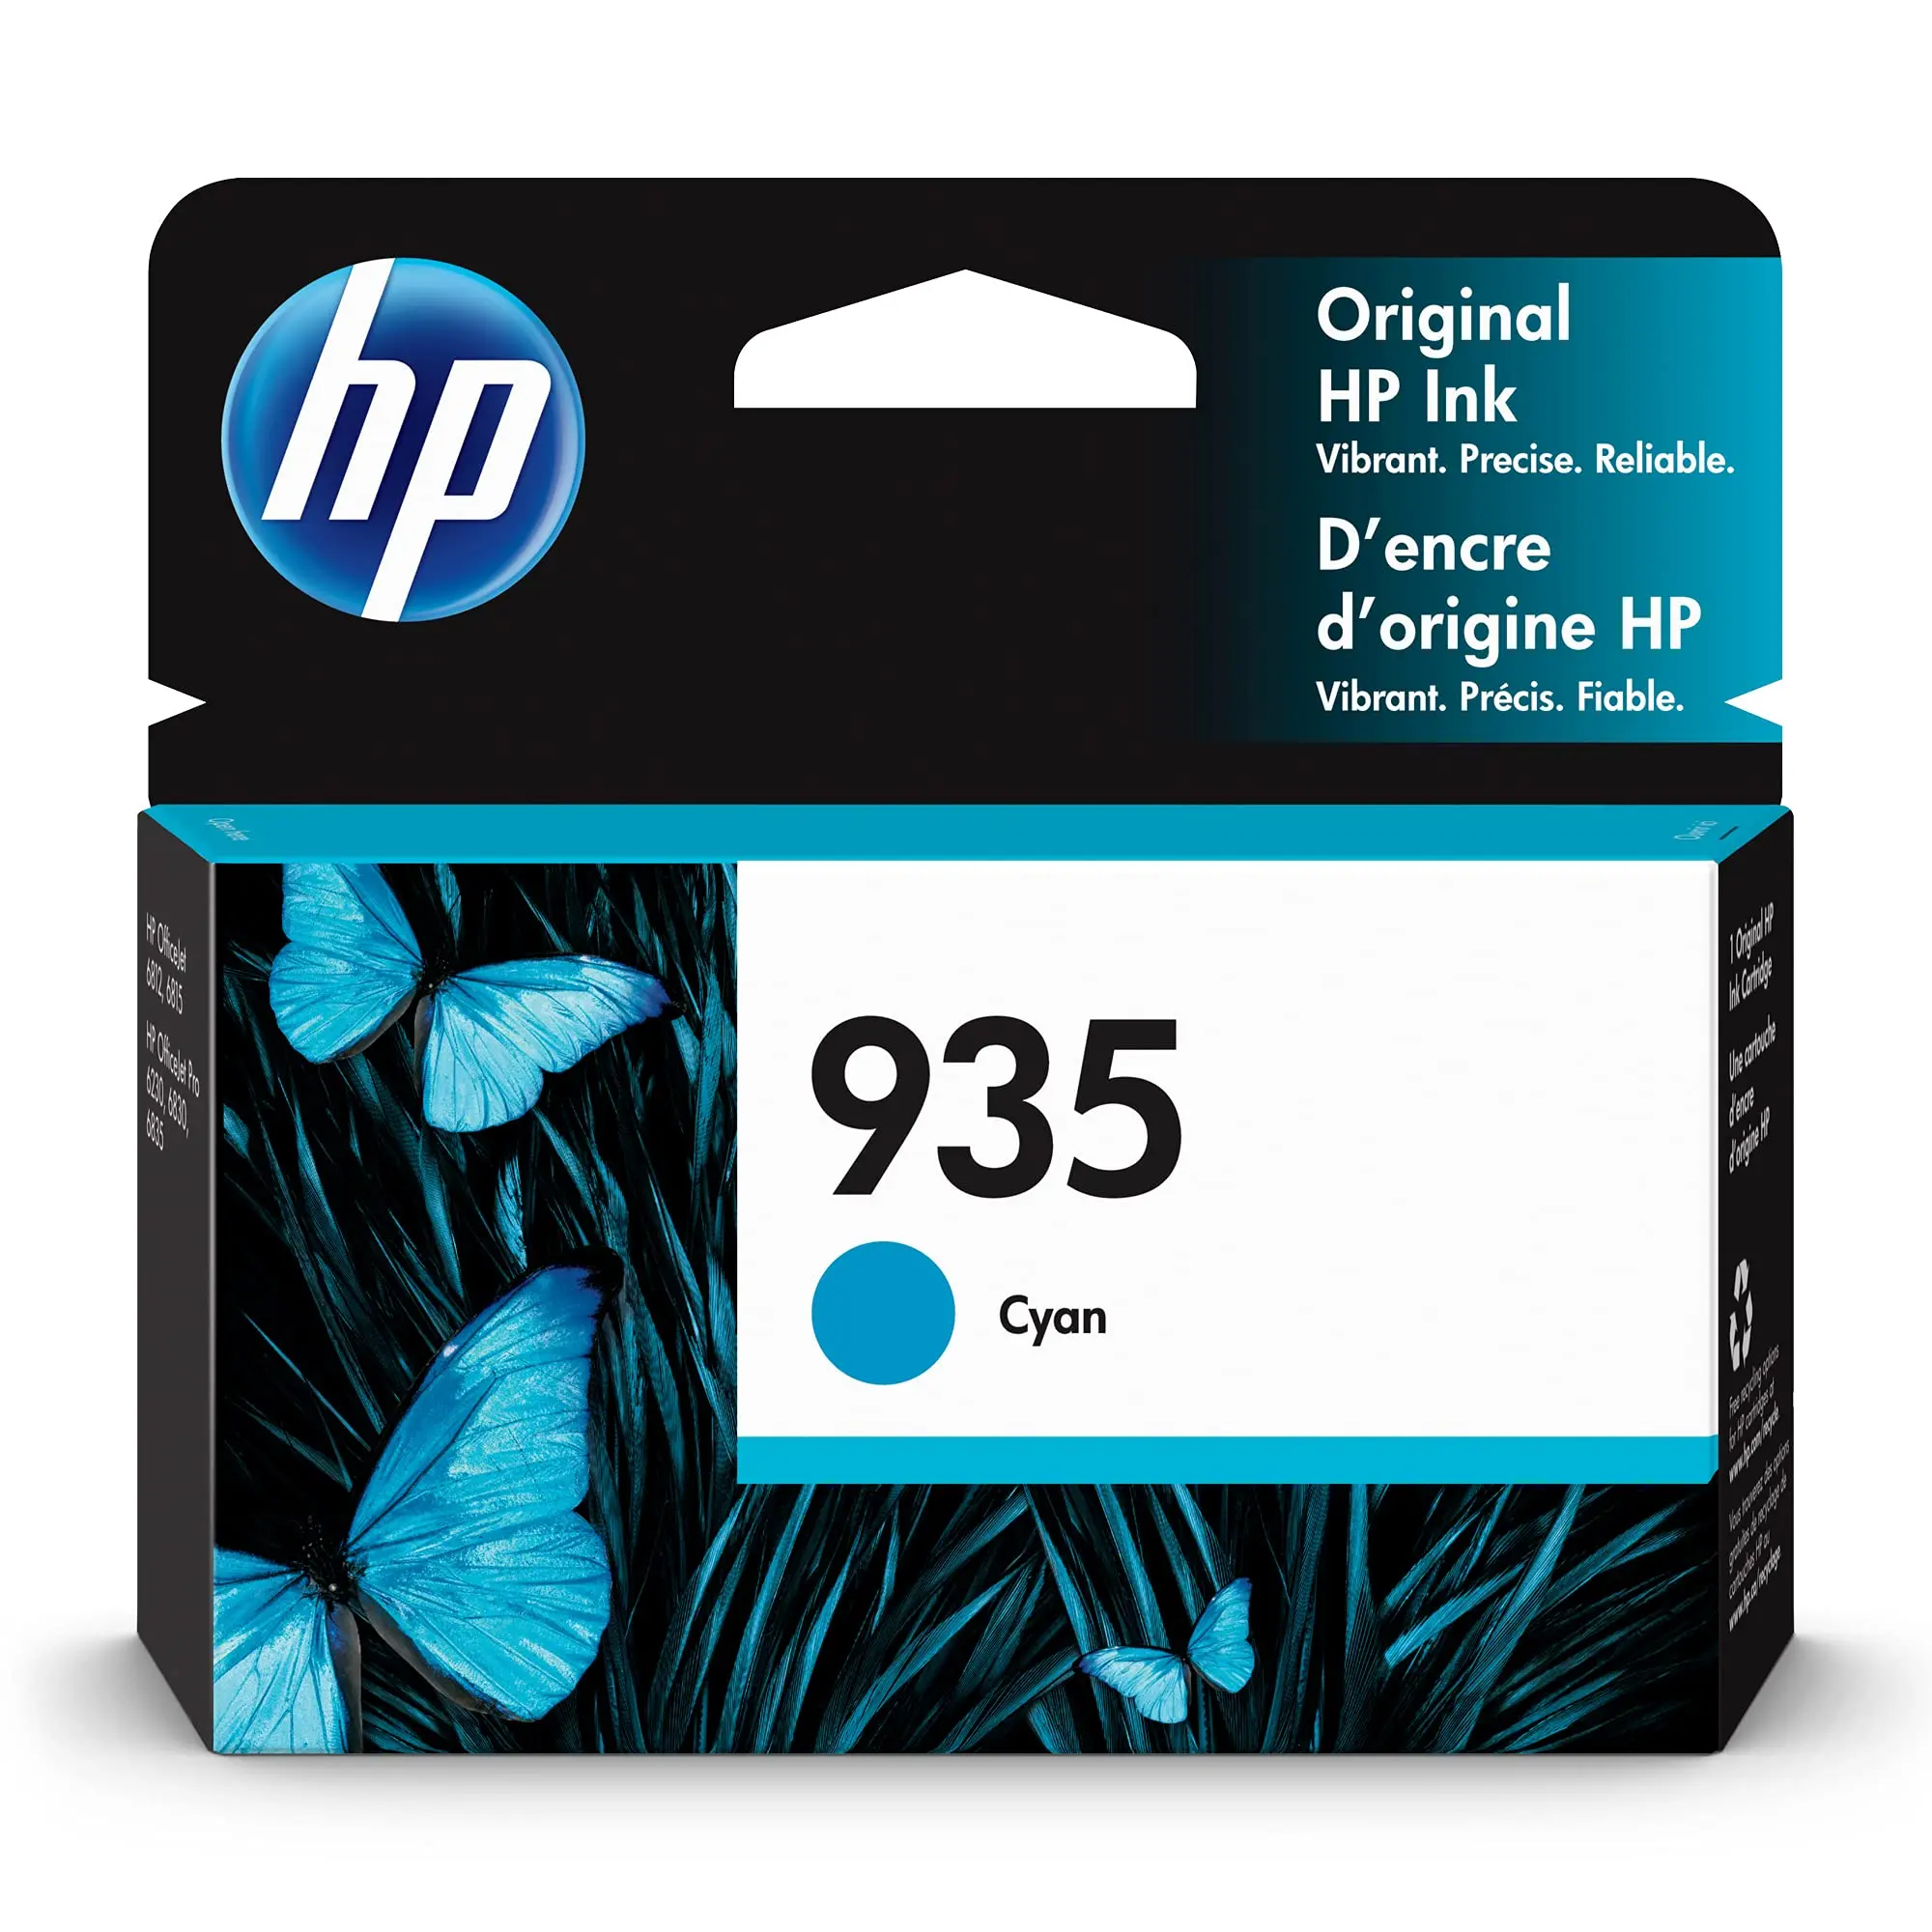 Hp 935: the ultimate printer cartridge for reliable and high-quality prints